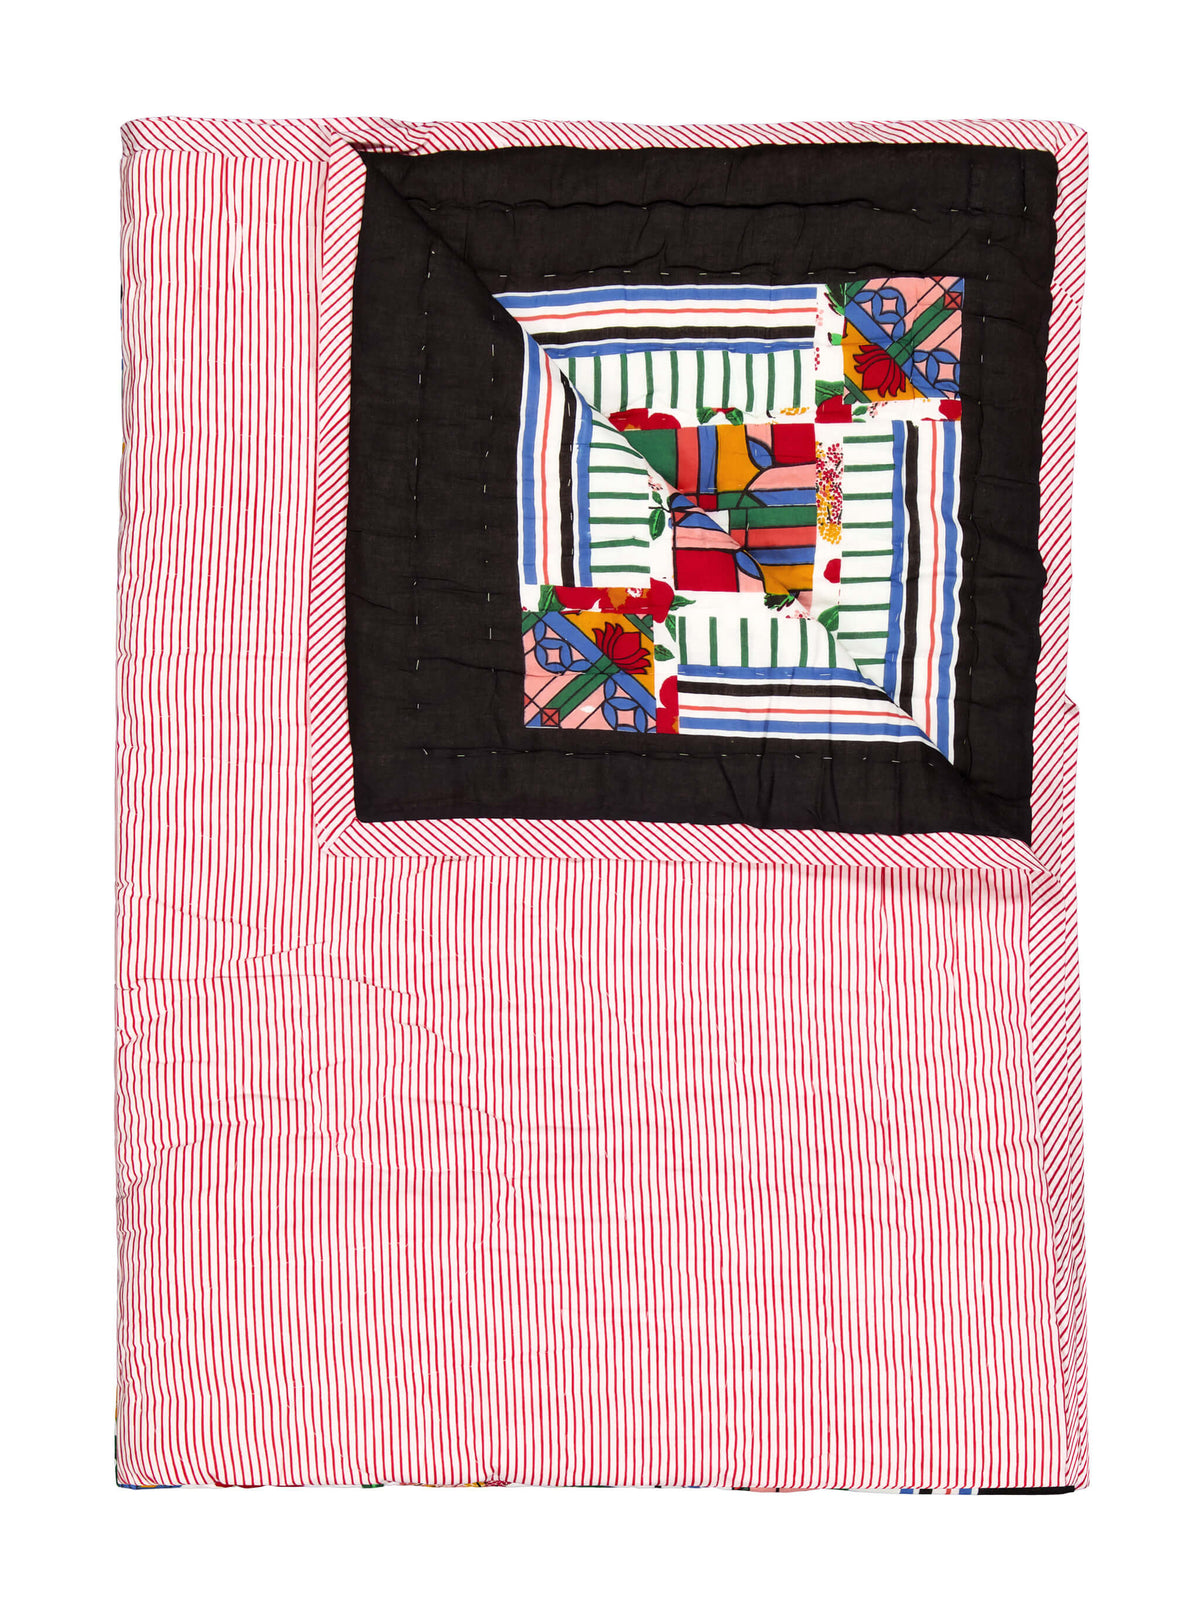 Reversible quilted play mat